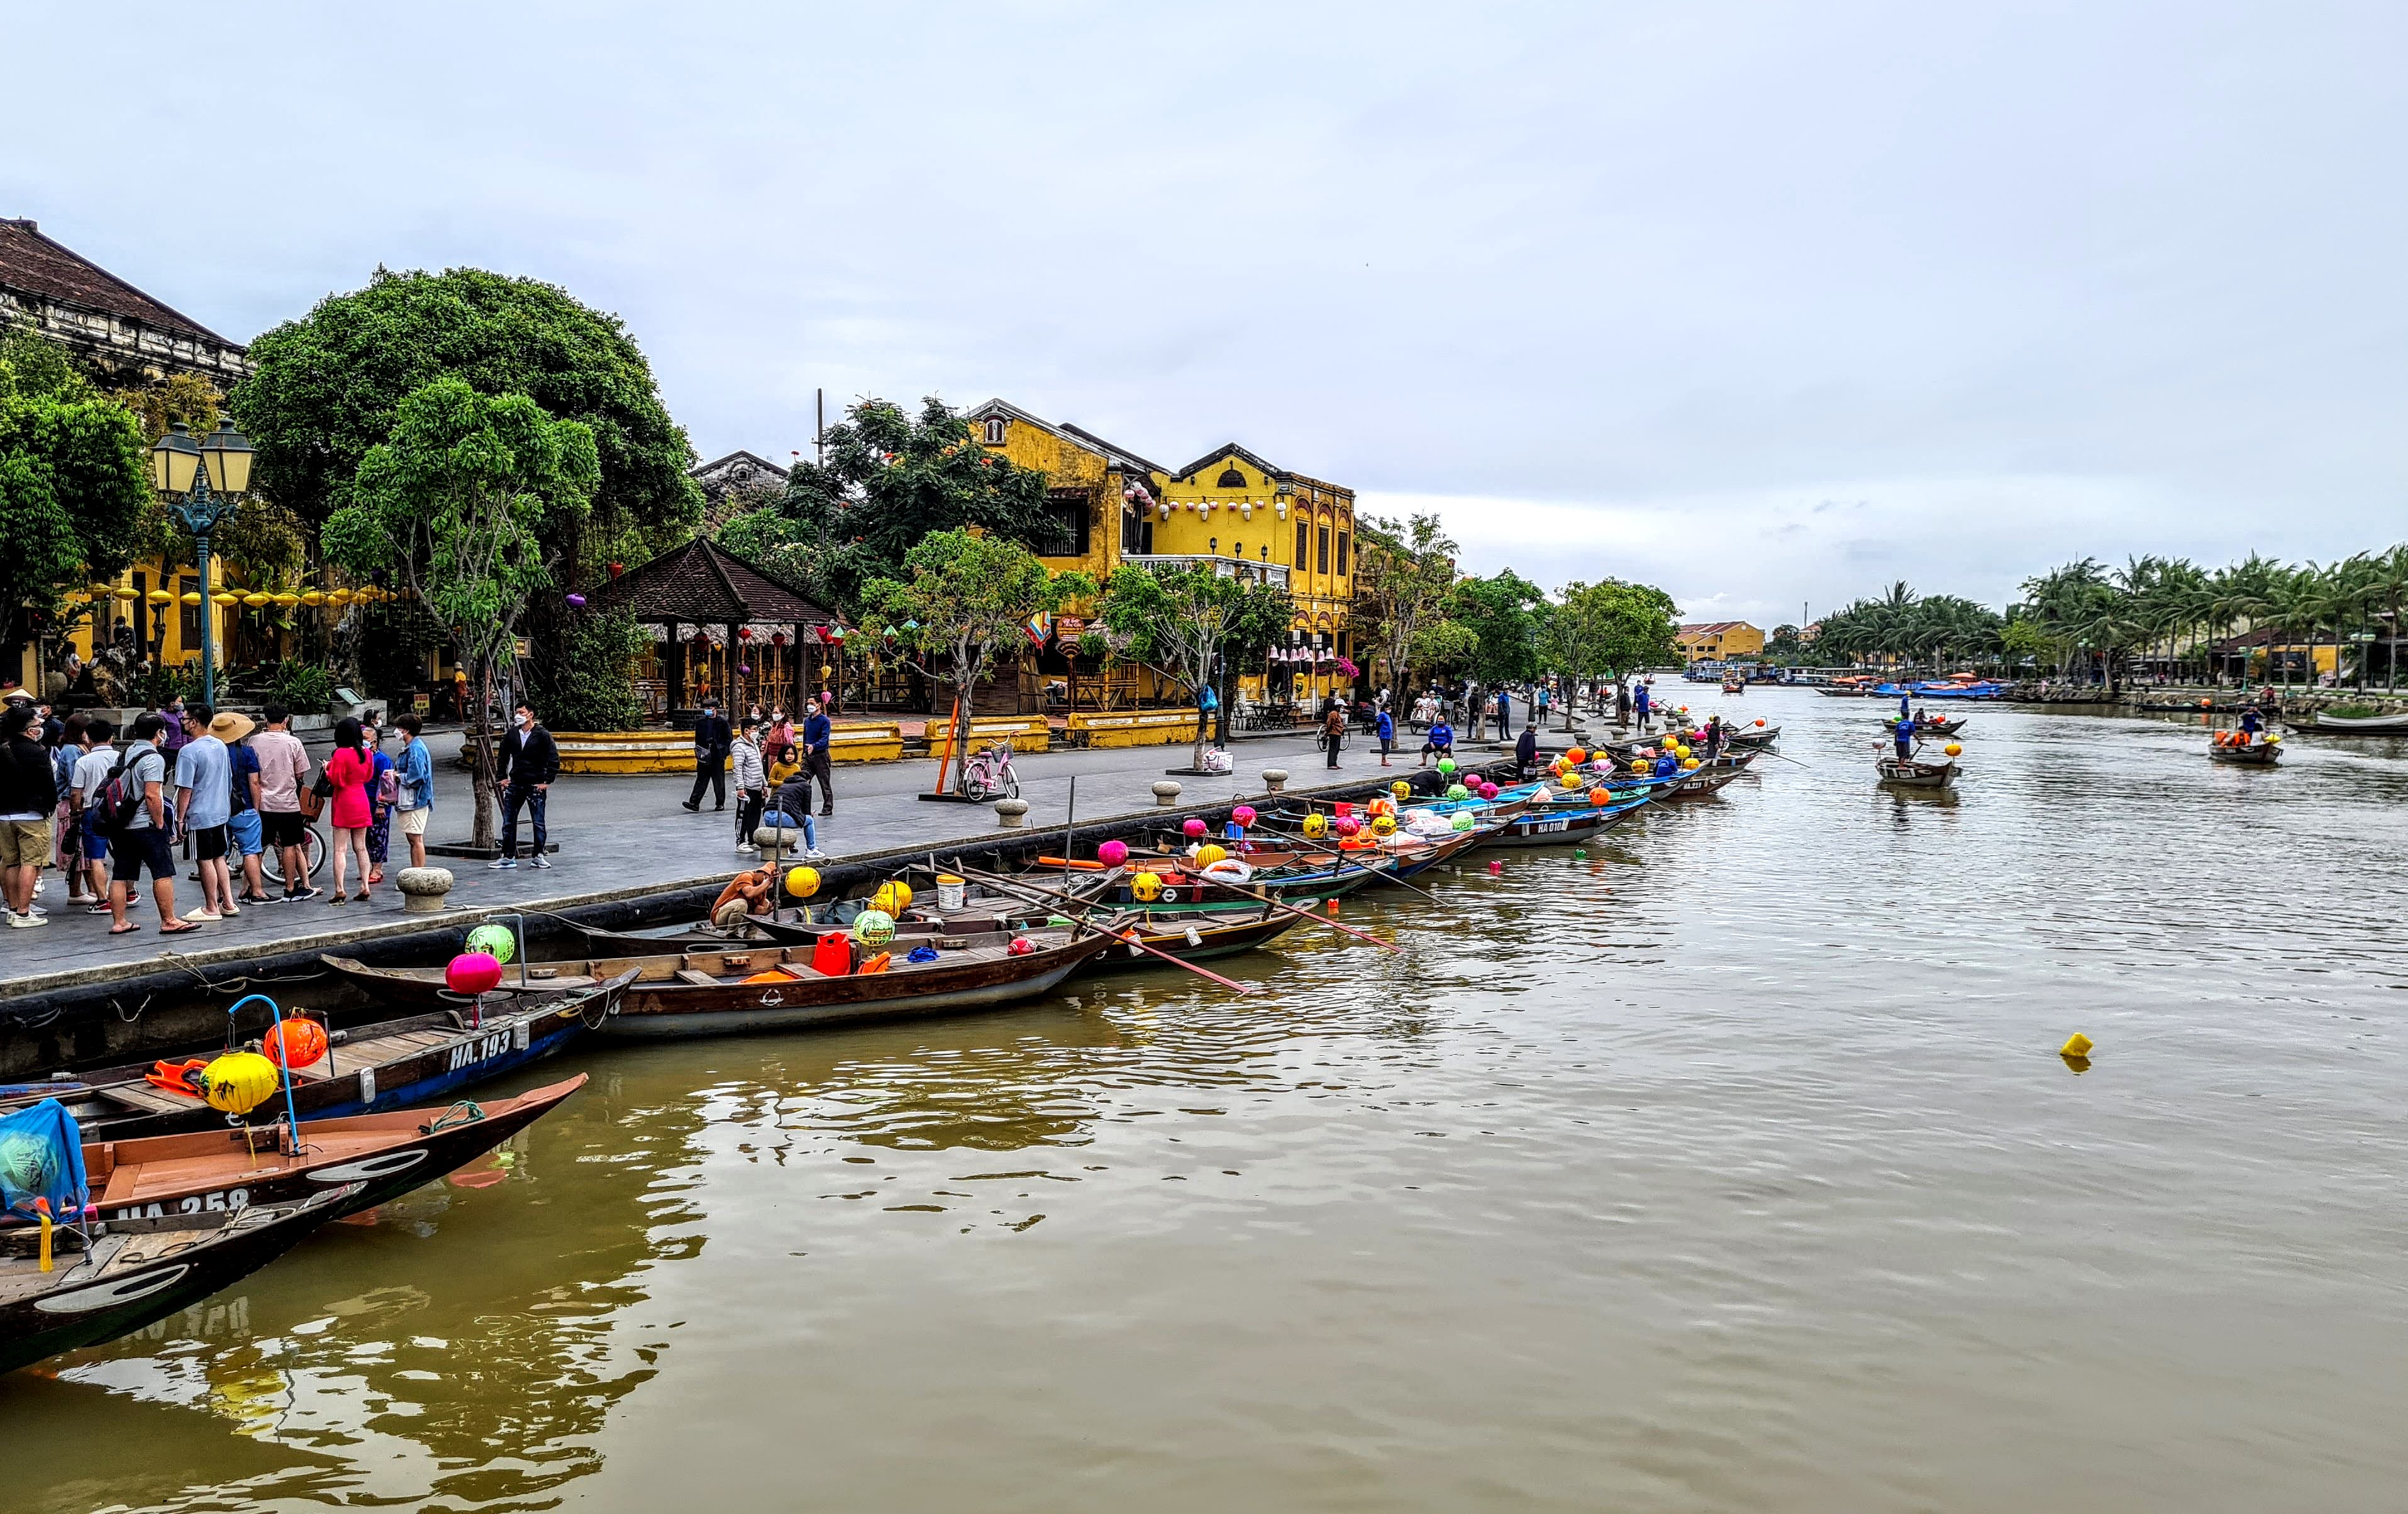 Tourist boats dock along the Hoai River in Hoi An Ancient Town, Quang Nam Province, Vietnam. Photo taken on April 3, 2022. Photo: Duy Khang / Tuoi Tre